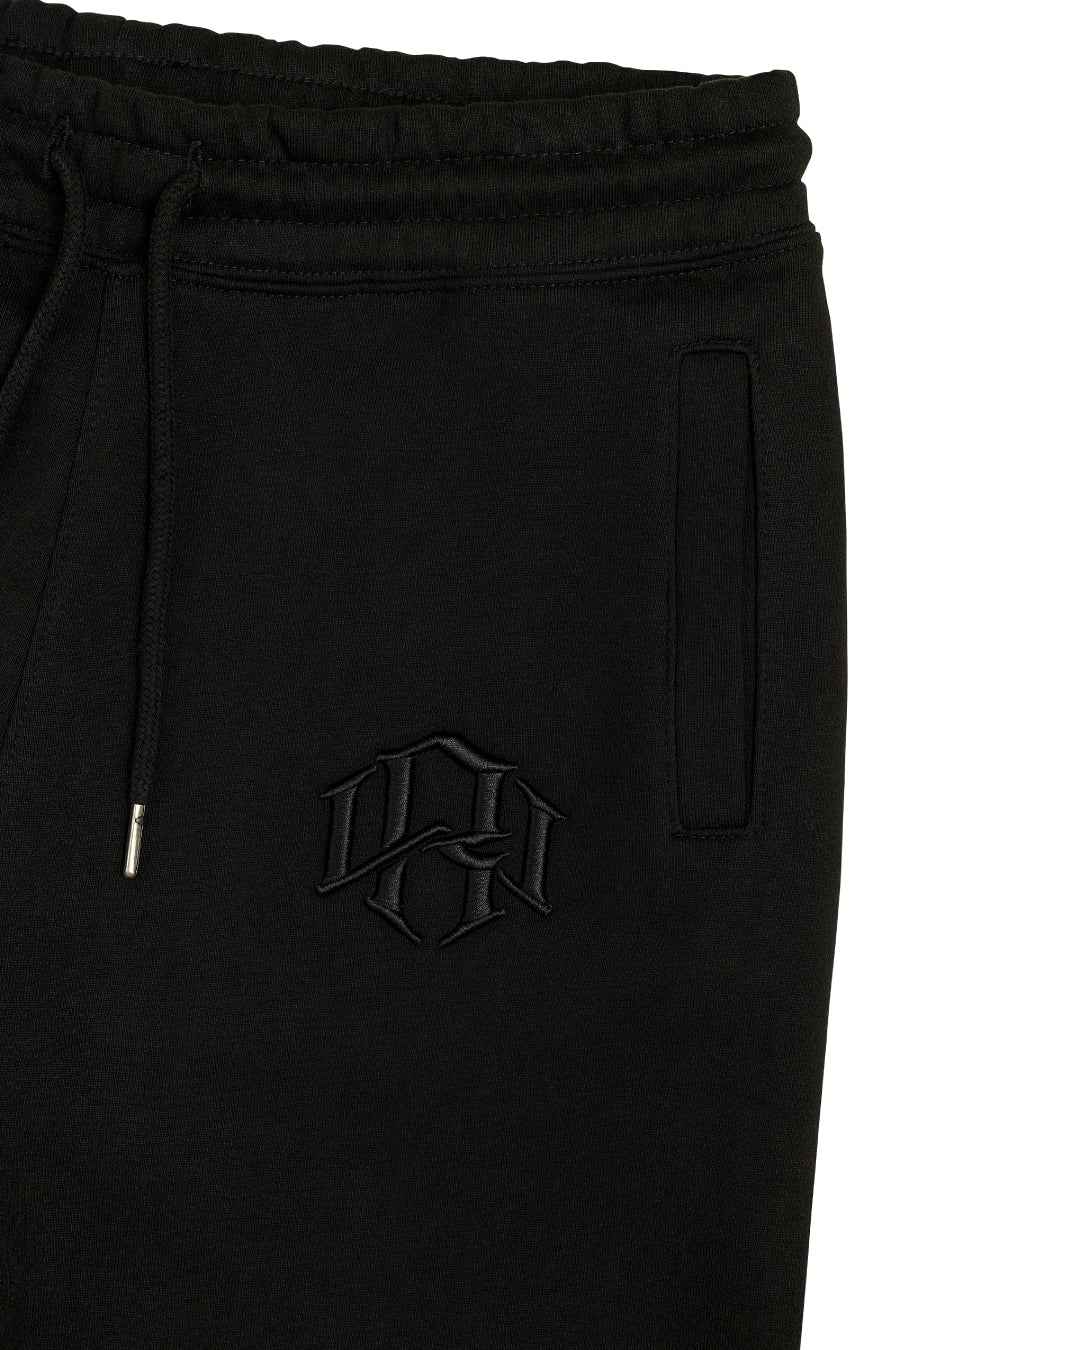 Details close up of Black Colored Premium 400gsm Heavyweight Sweatpants by RENOWNED WEAR